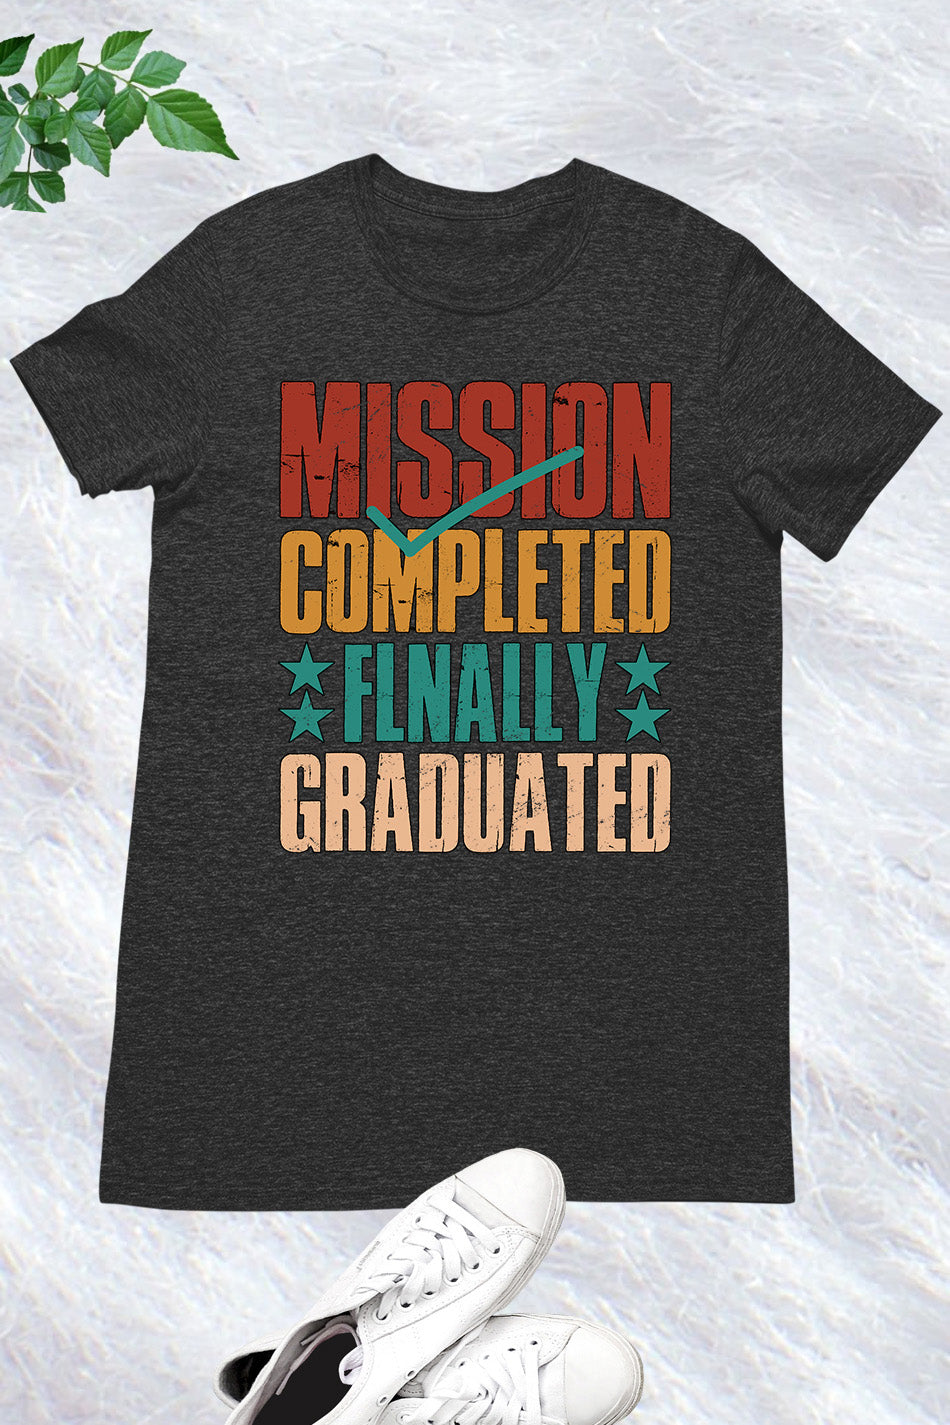 Mission Completed Finally Grad T Shirts